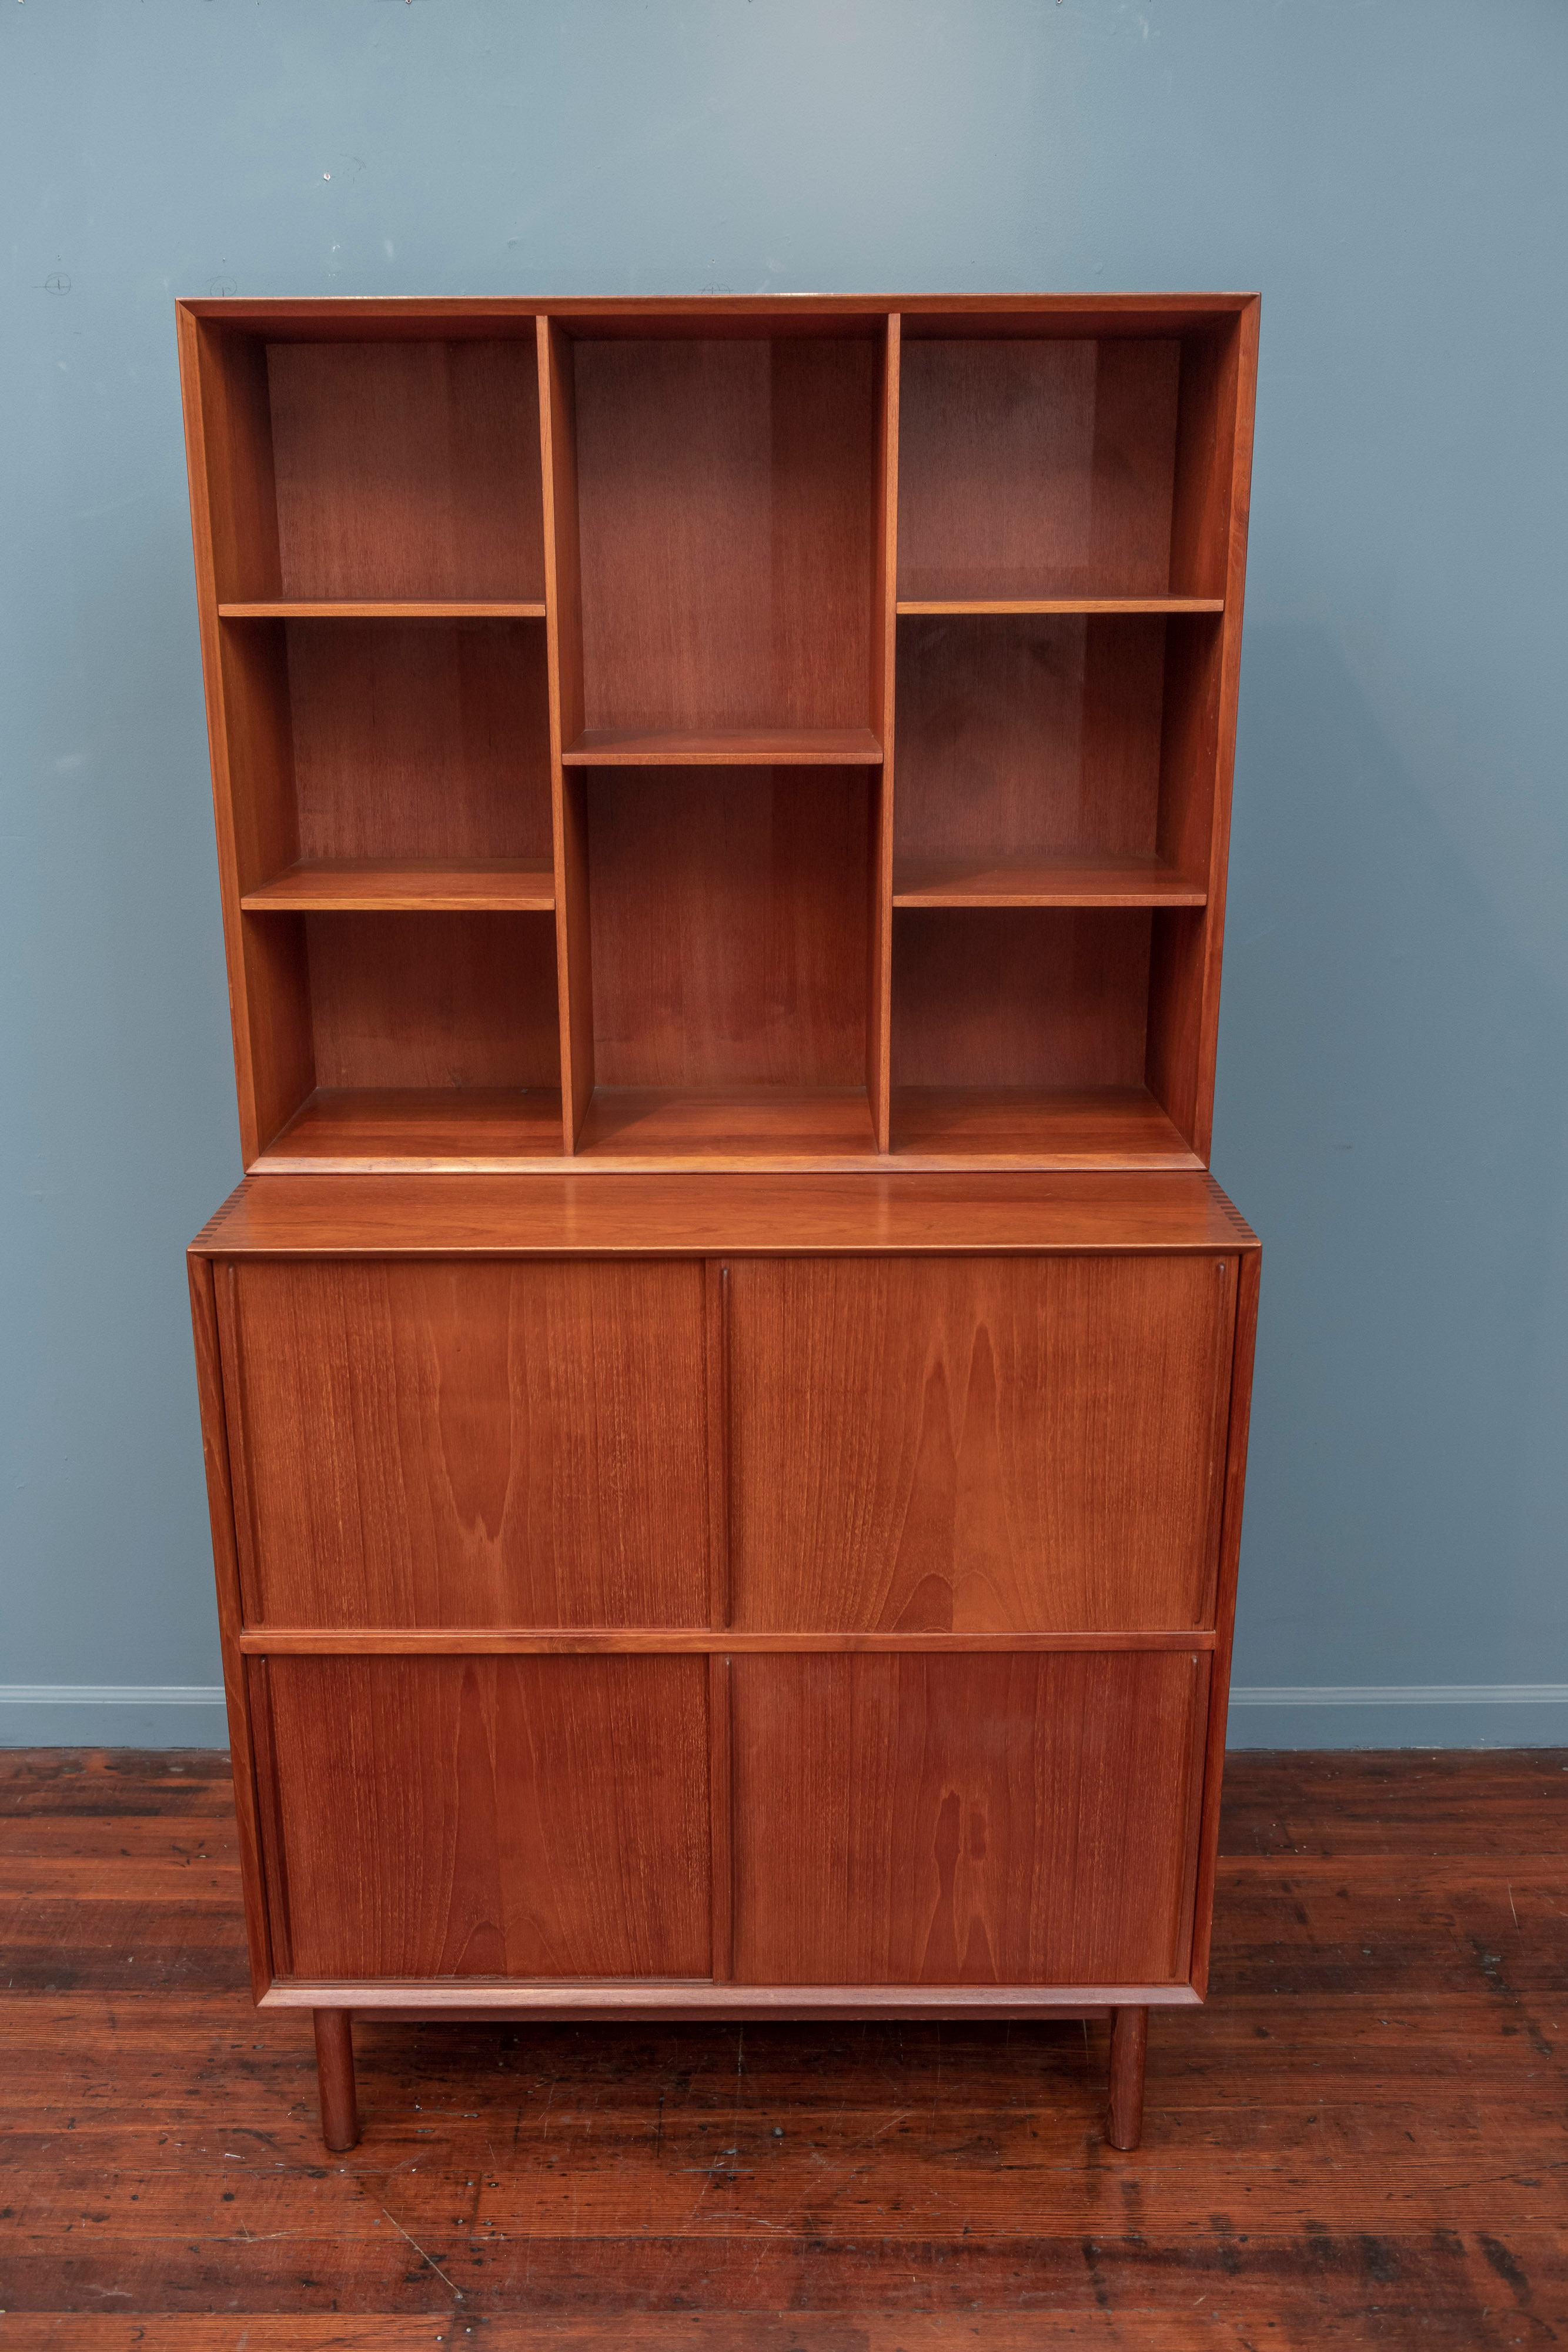 Peter Hvidt & Orla Molgaard Nielsen design bookcase cabinet, Denmark. High quality construction in solid teak with dovetail joinery and adjustable shelves throughout. Unusual lower sliding doors that glide smoothly without effort concealing two